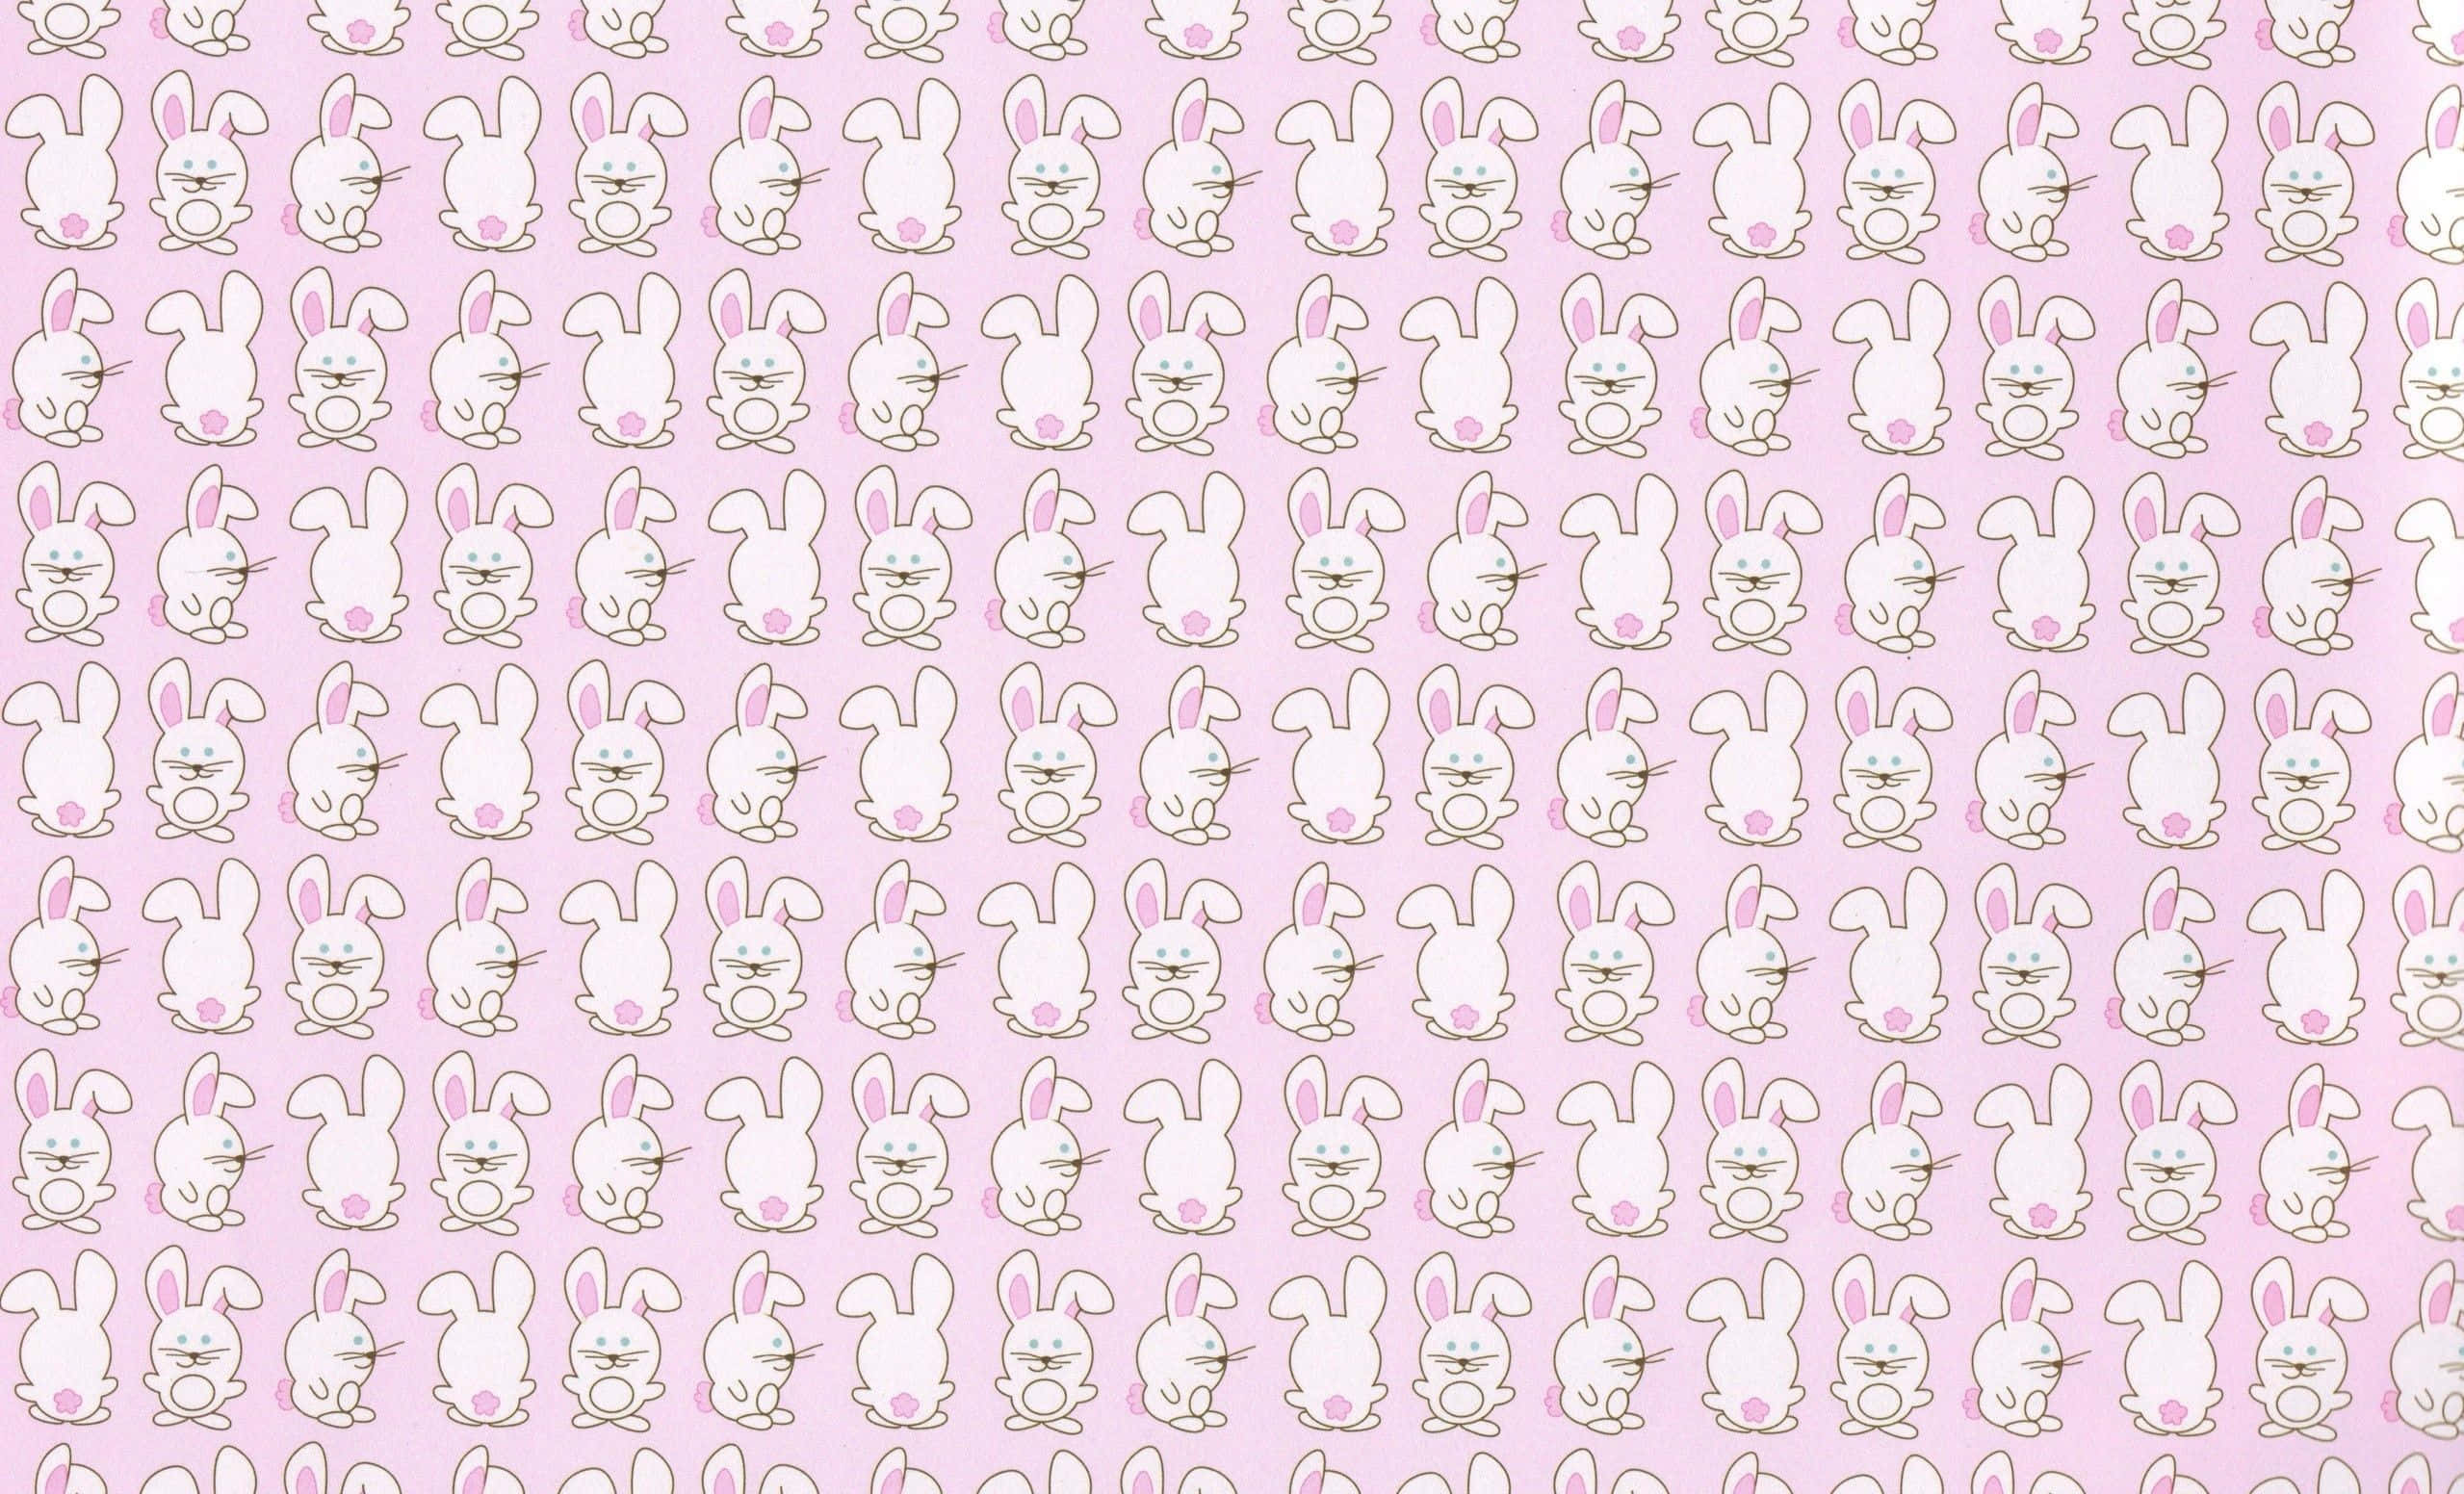 Jump for joy with this Pink Bunny! Wallpaper